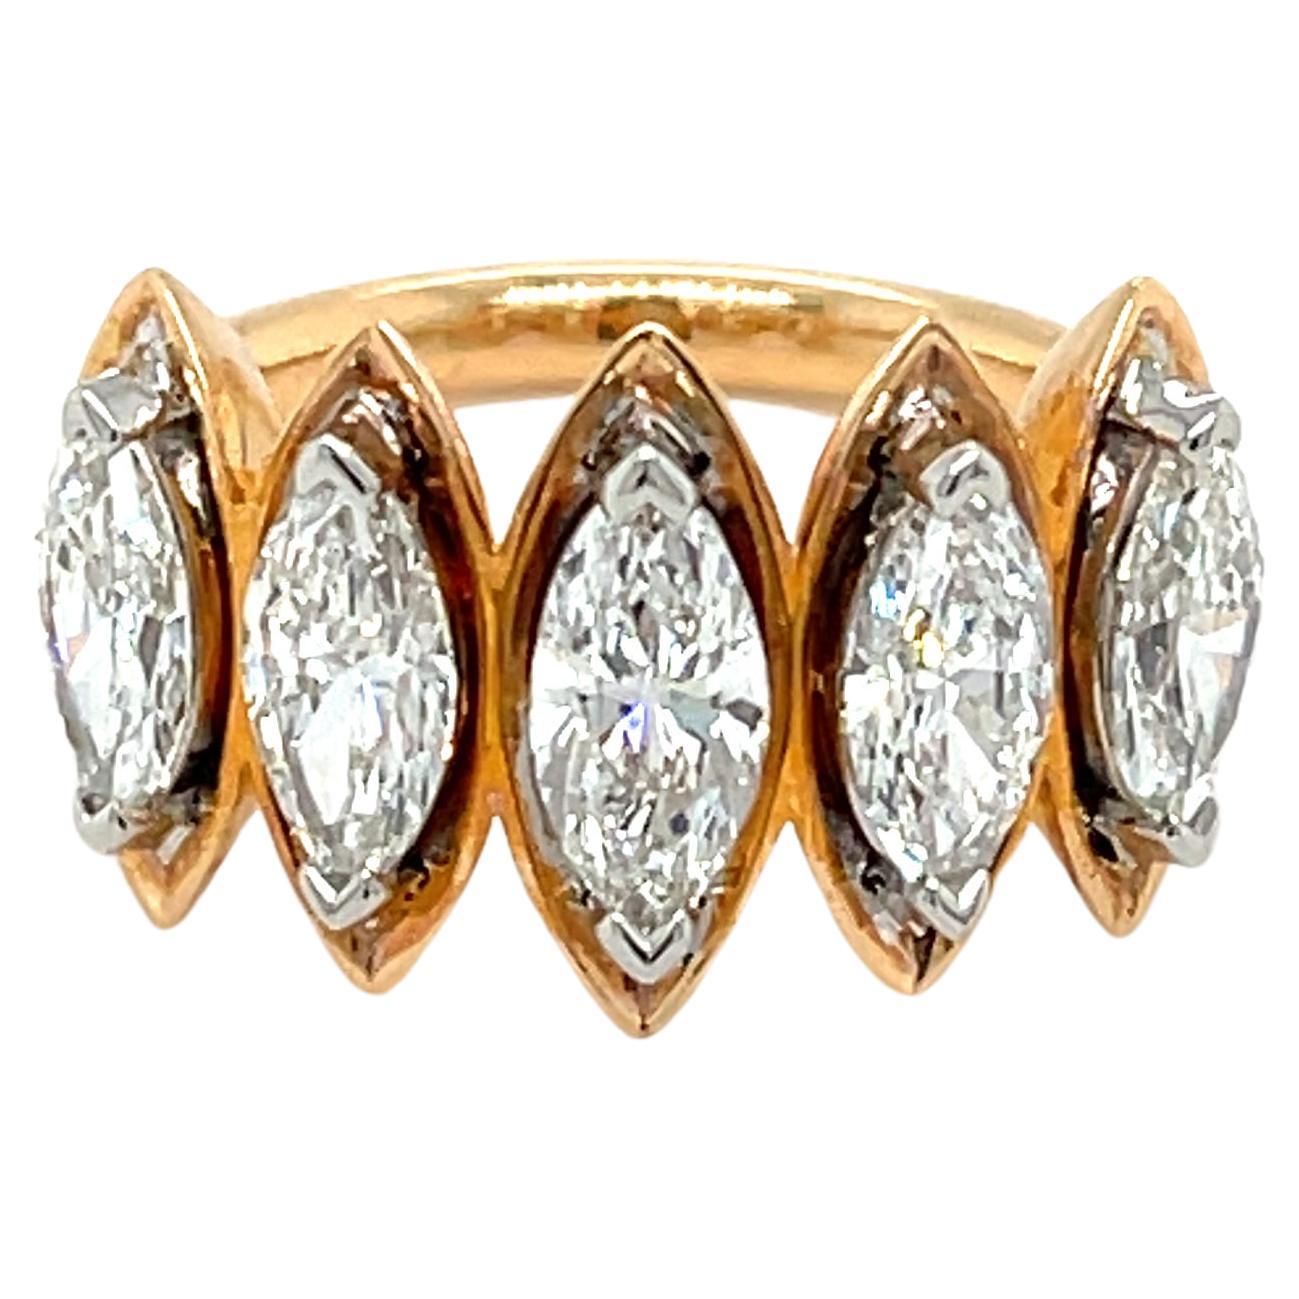 Five Marquise Diamond 2.13 Carat Diamond Ring in 18K Rose Gold For Sale